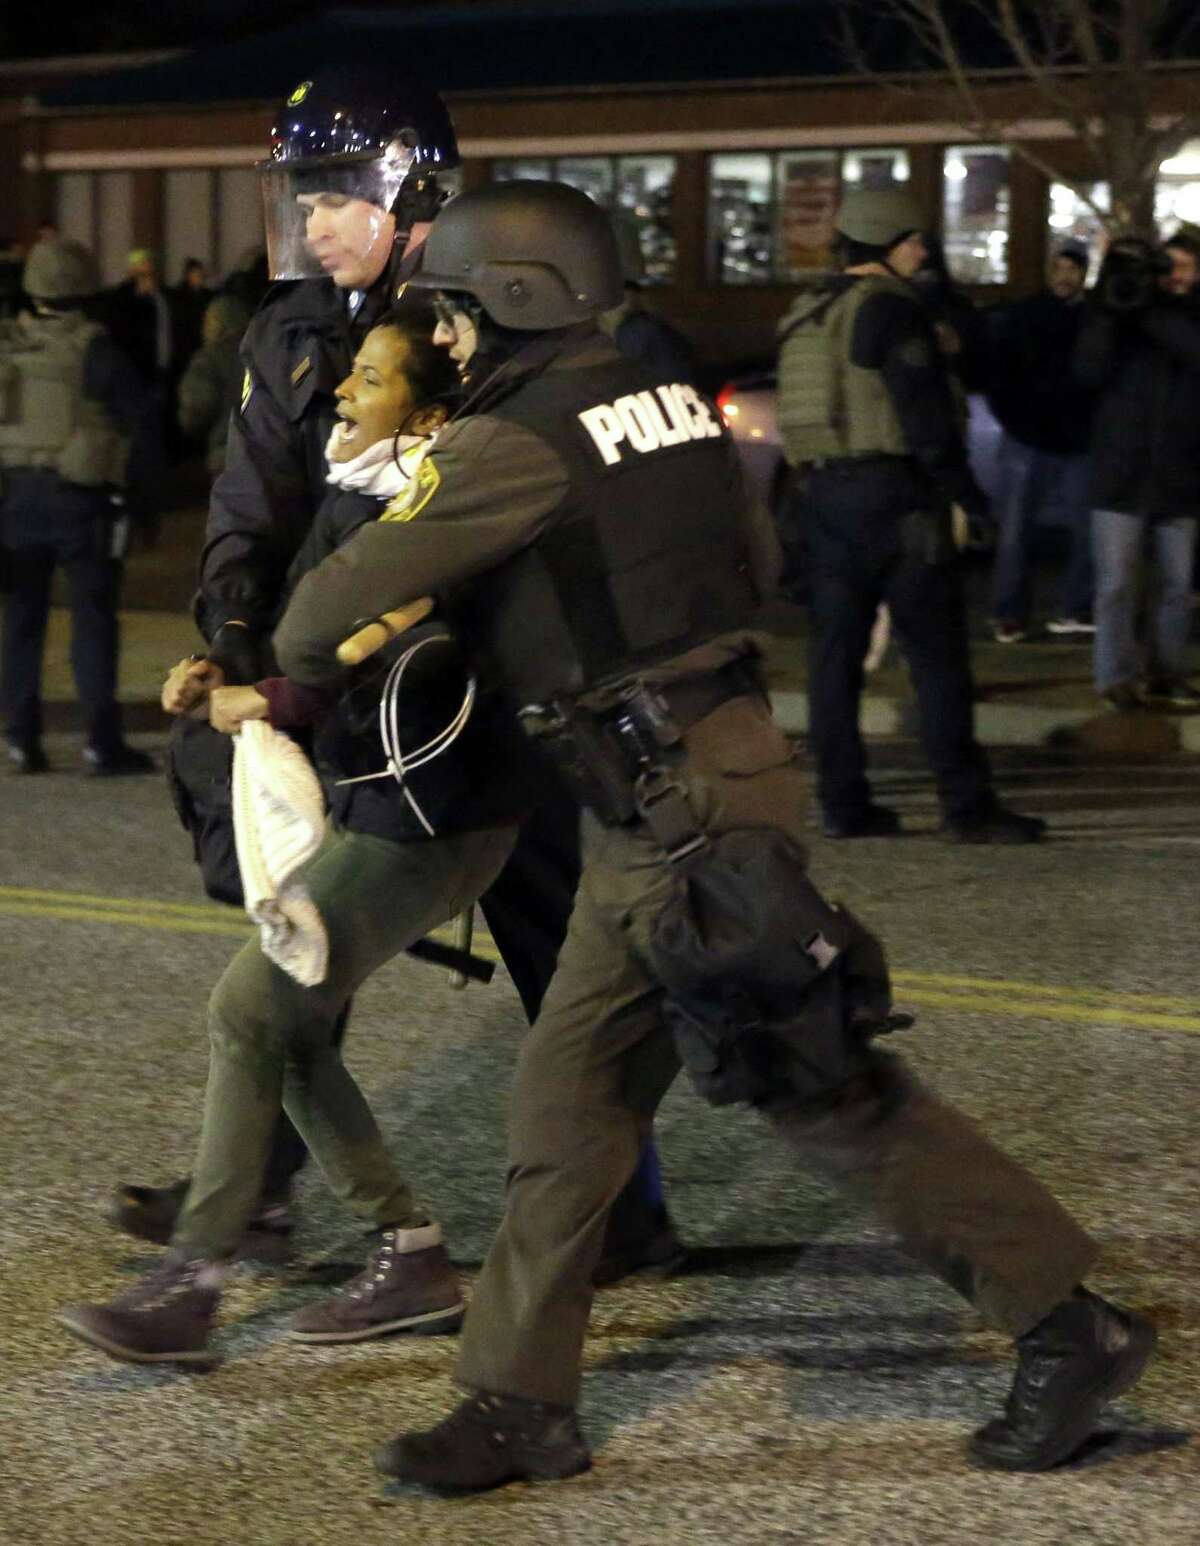 A protester is taken into custody Friday, Nov. 28, 2014, in Ferguson, Mo. Several protesters have been taken into custody during a demonstration outside the police department. Tensions escalated late Friday during an initially calm demonstration after police said protesters were illegally blocking West Florissant Avenue. (AP Photo/Jeff Roberson)